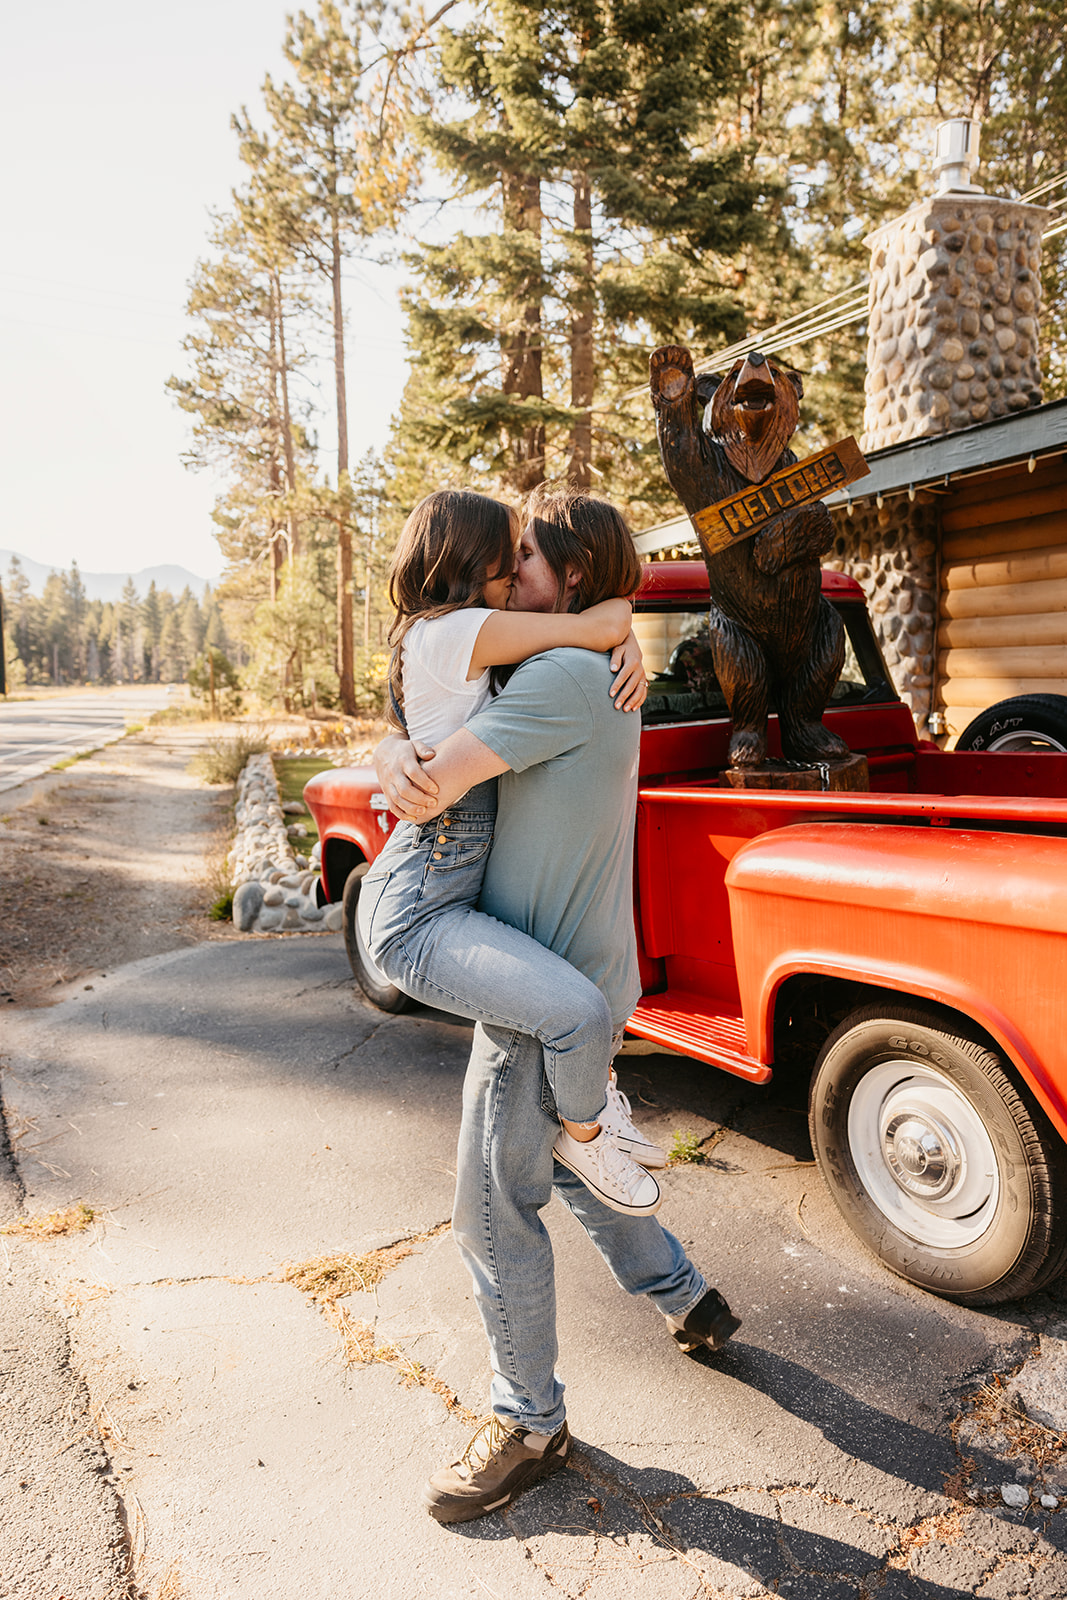 Dani Rawson Photo, a Tahoe-based Photographer, shares photos from a Fireside Lodge Engagement Session in Lake Tahoe, Nev